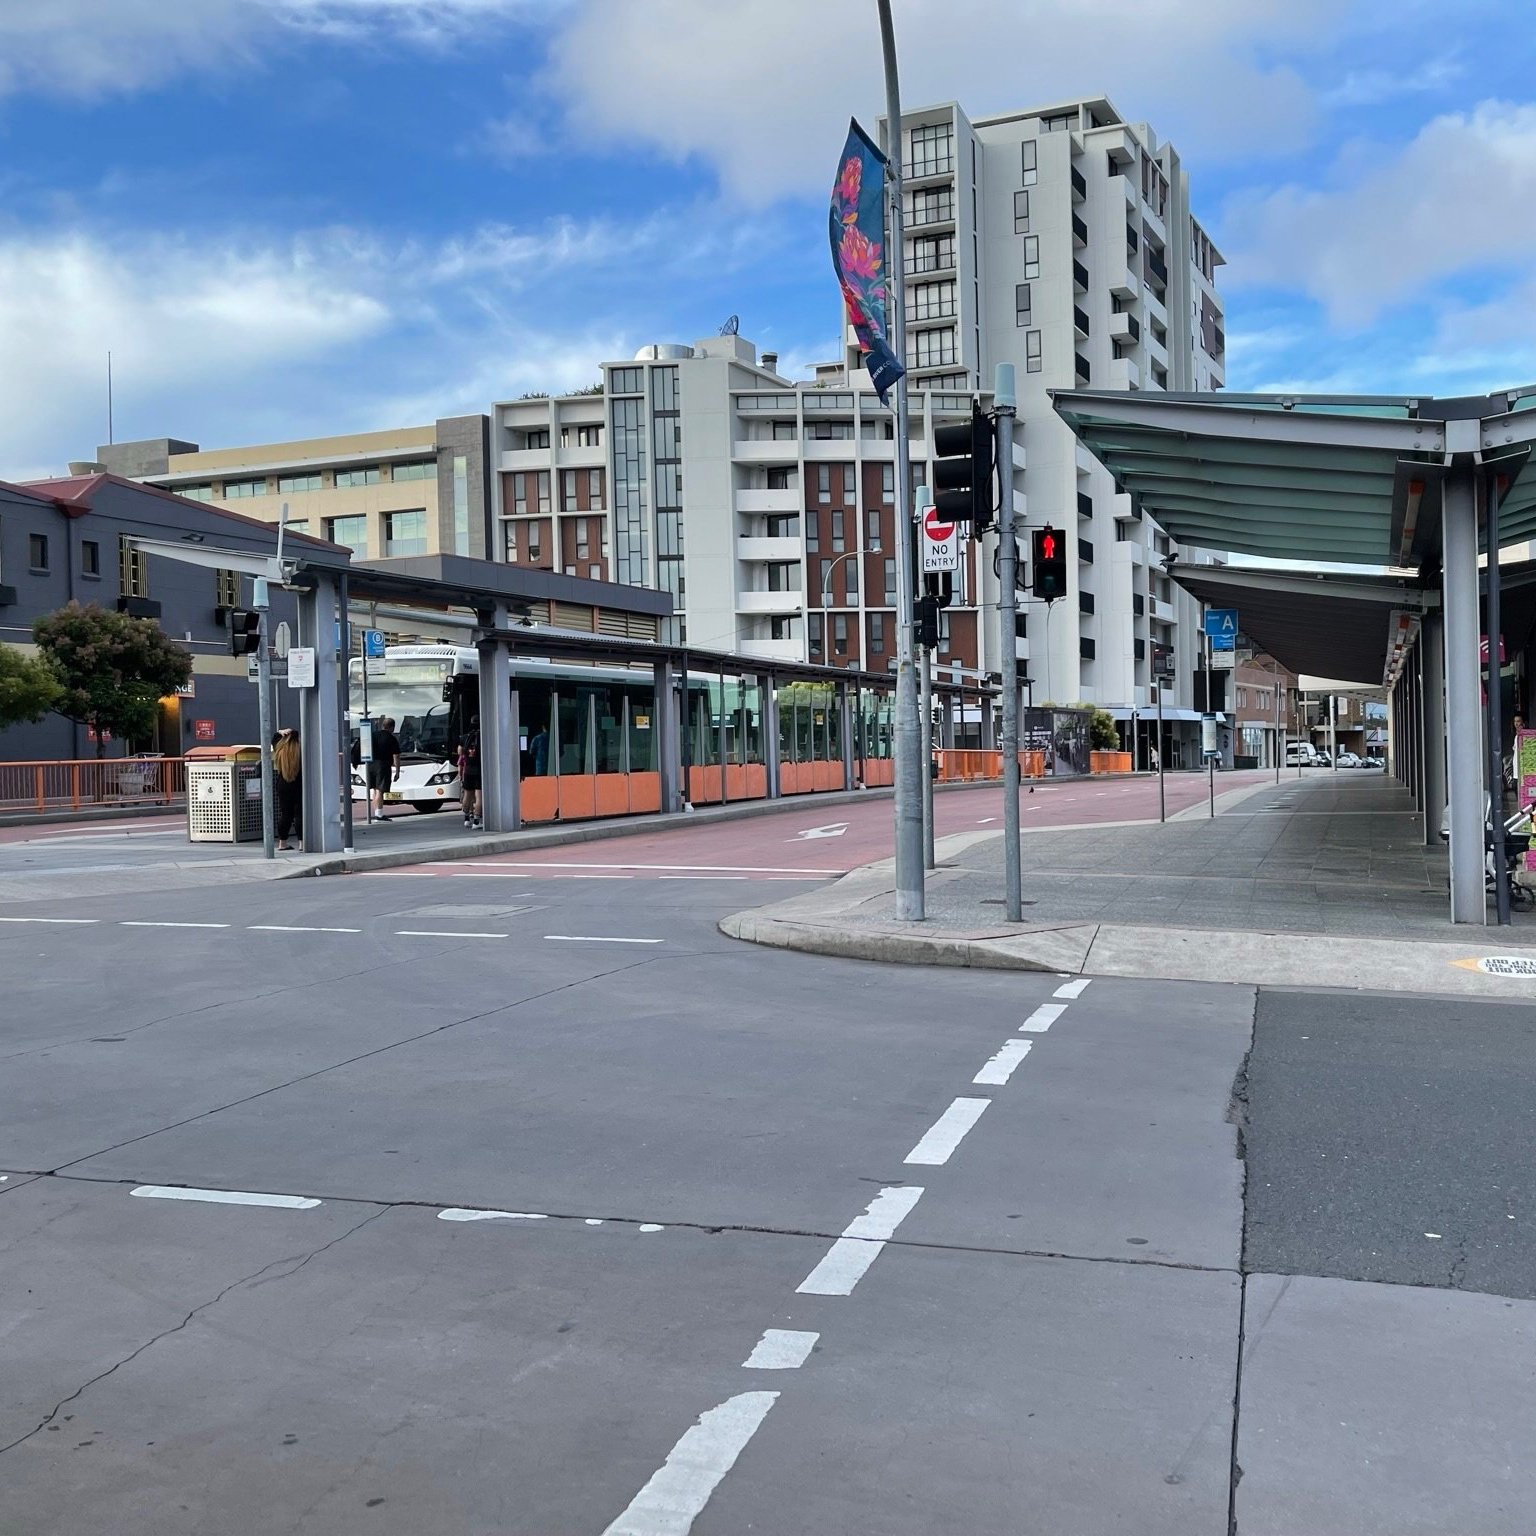 Cross the road and continue through the bus interchange